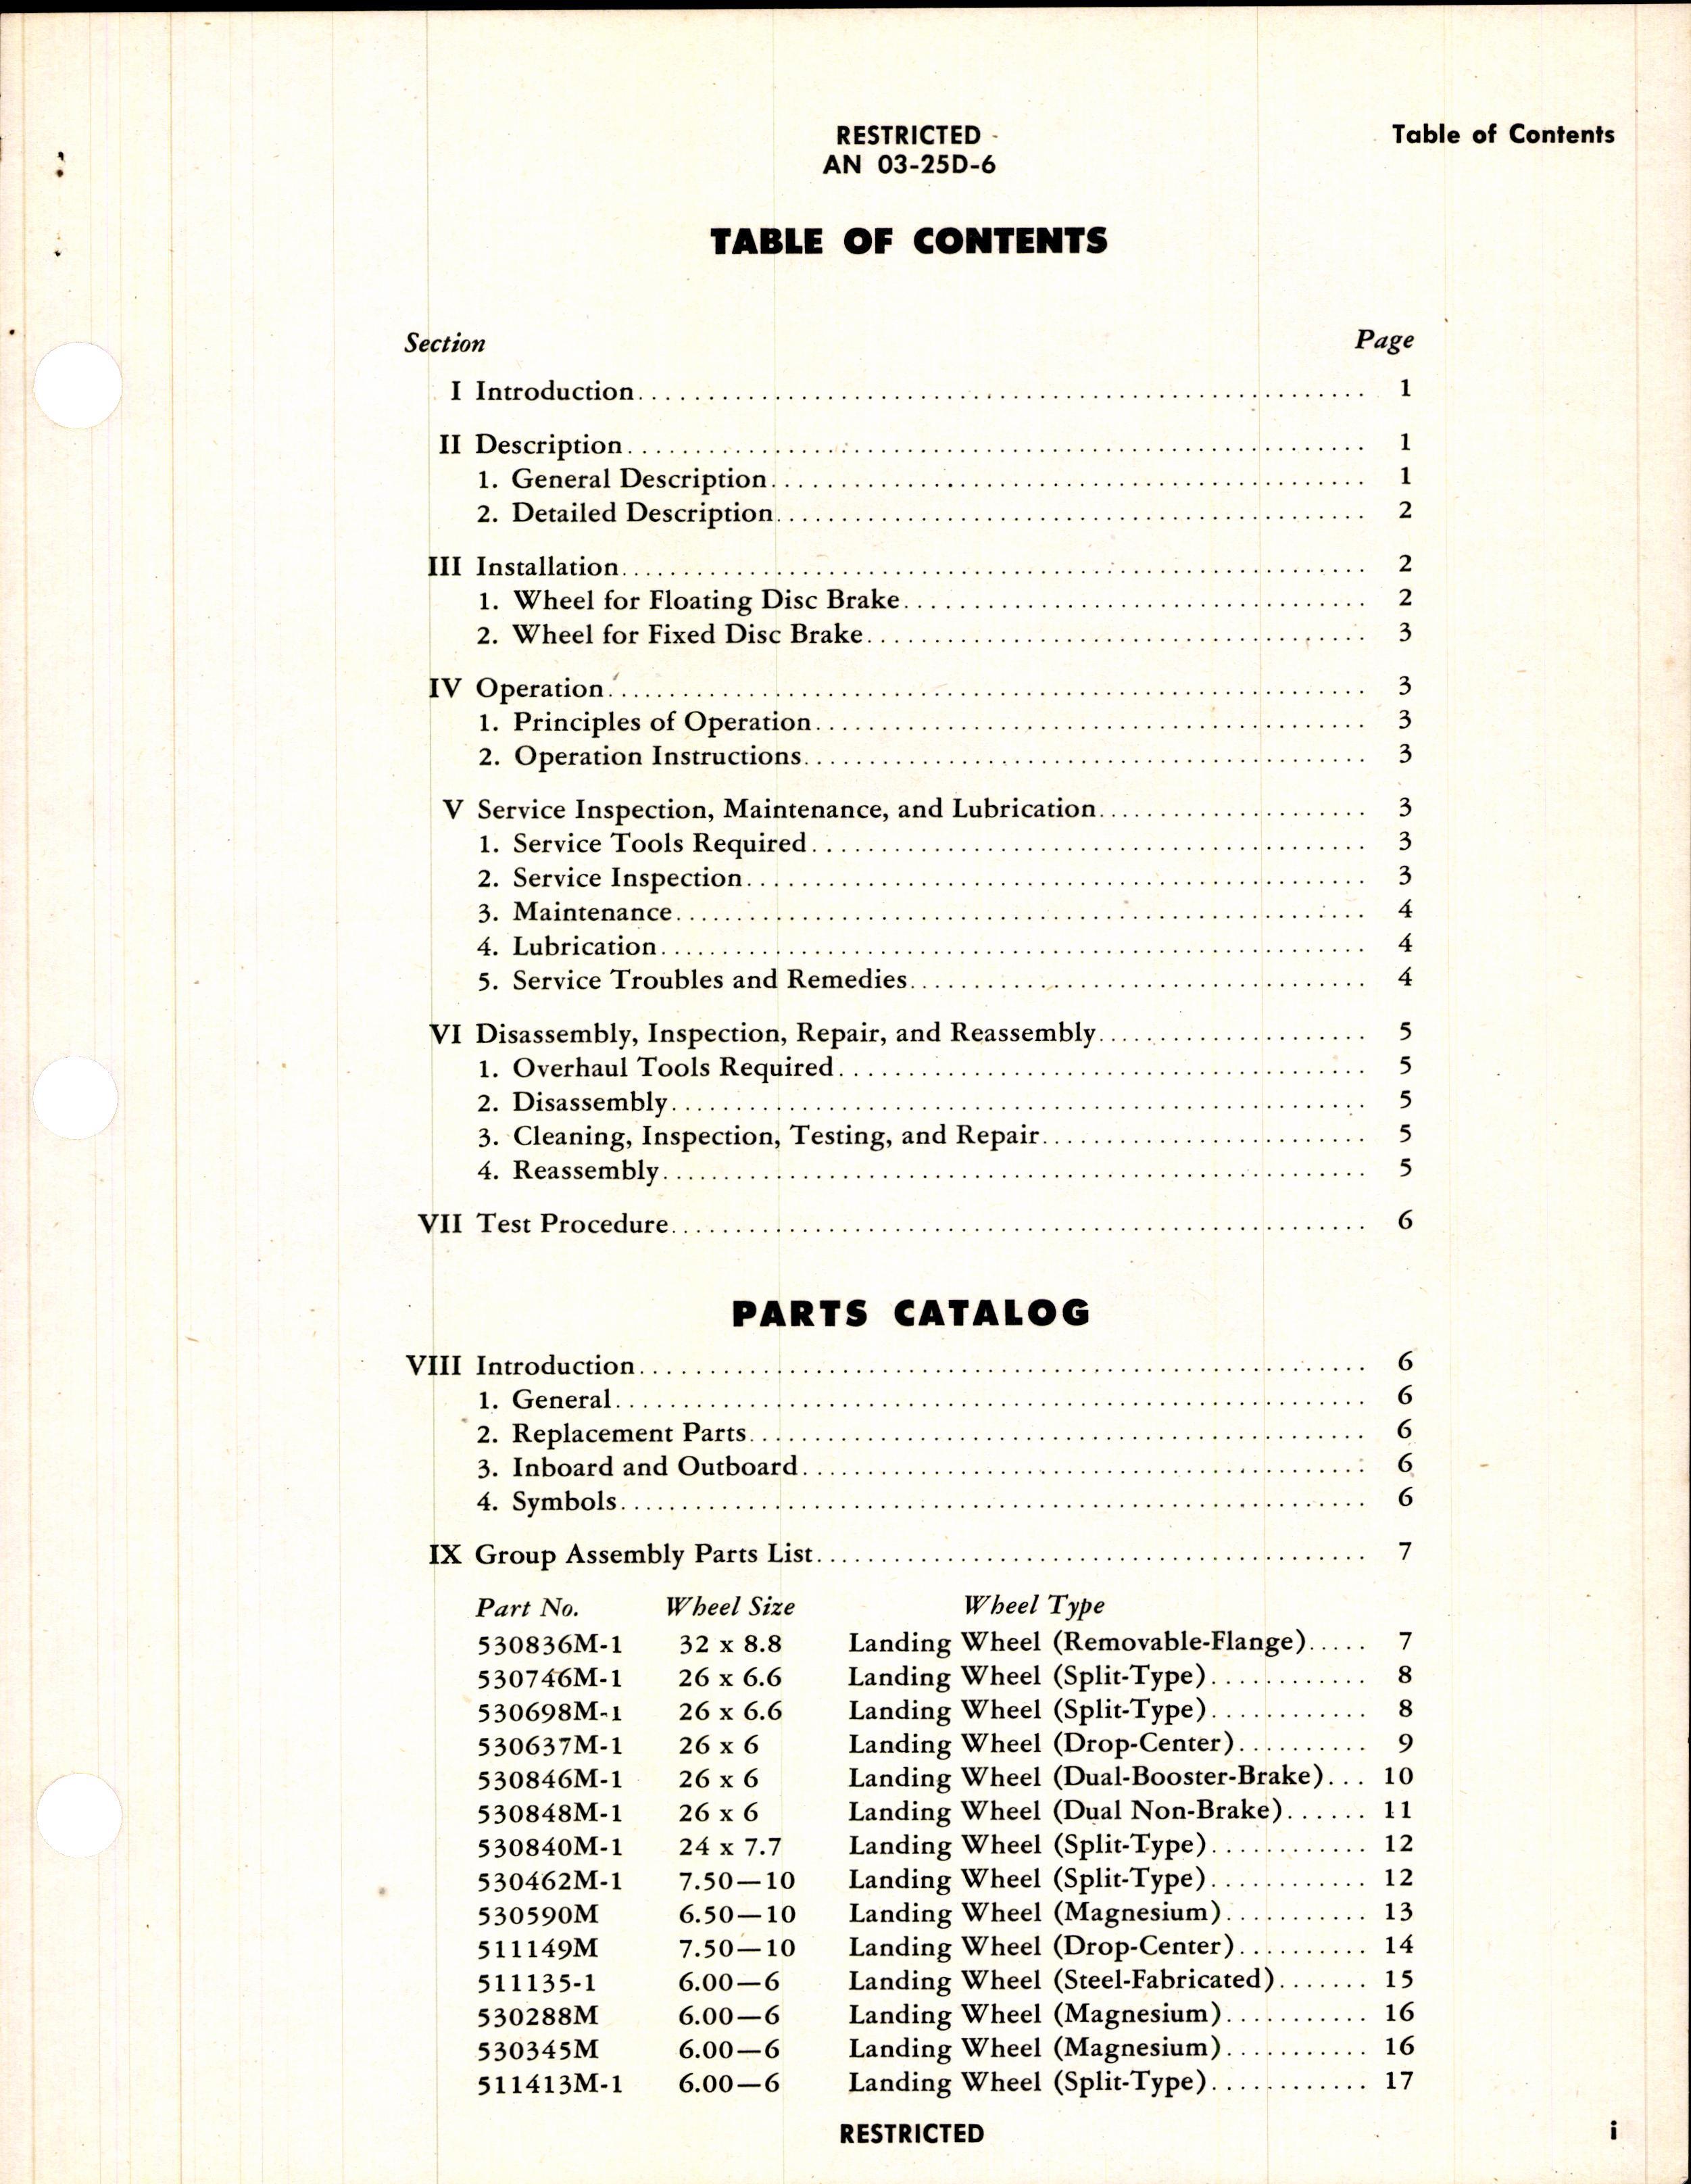 Sample page 3 from AirCorps Library document: Handbook of Instructions with Parts Catalog for Landing Wheels For Use With Single Disc Brakes